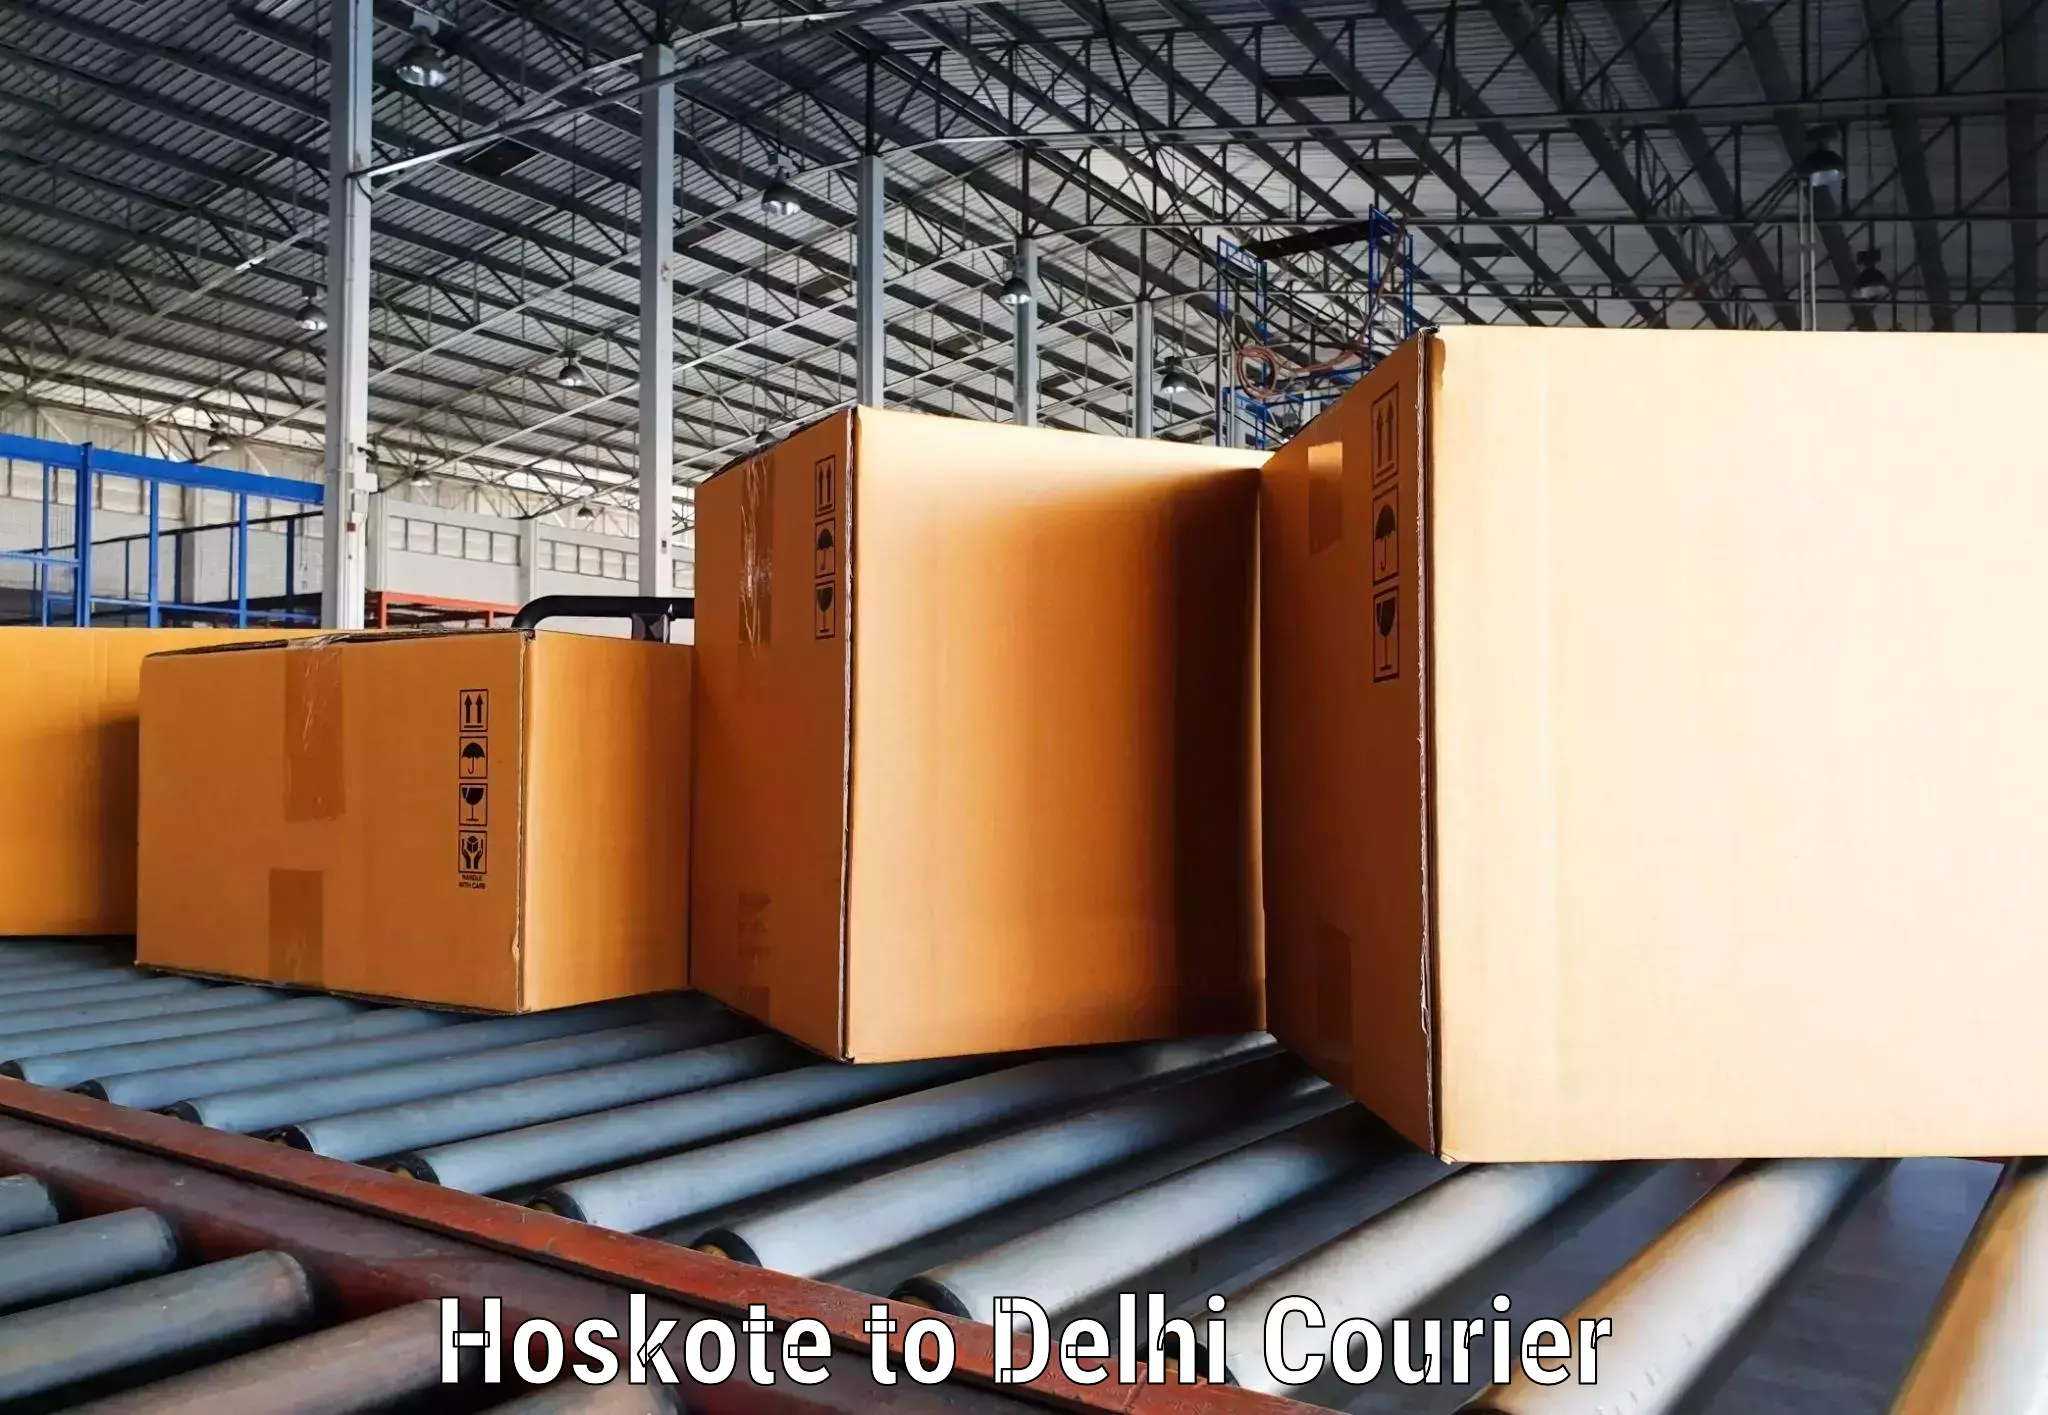 Express postal services in Hoskote to NCR